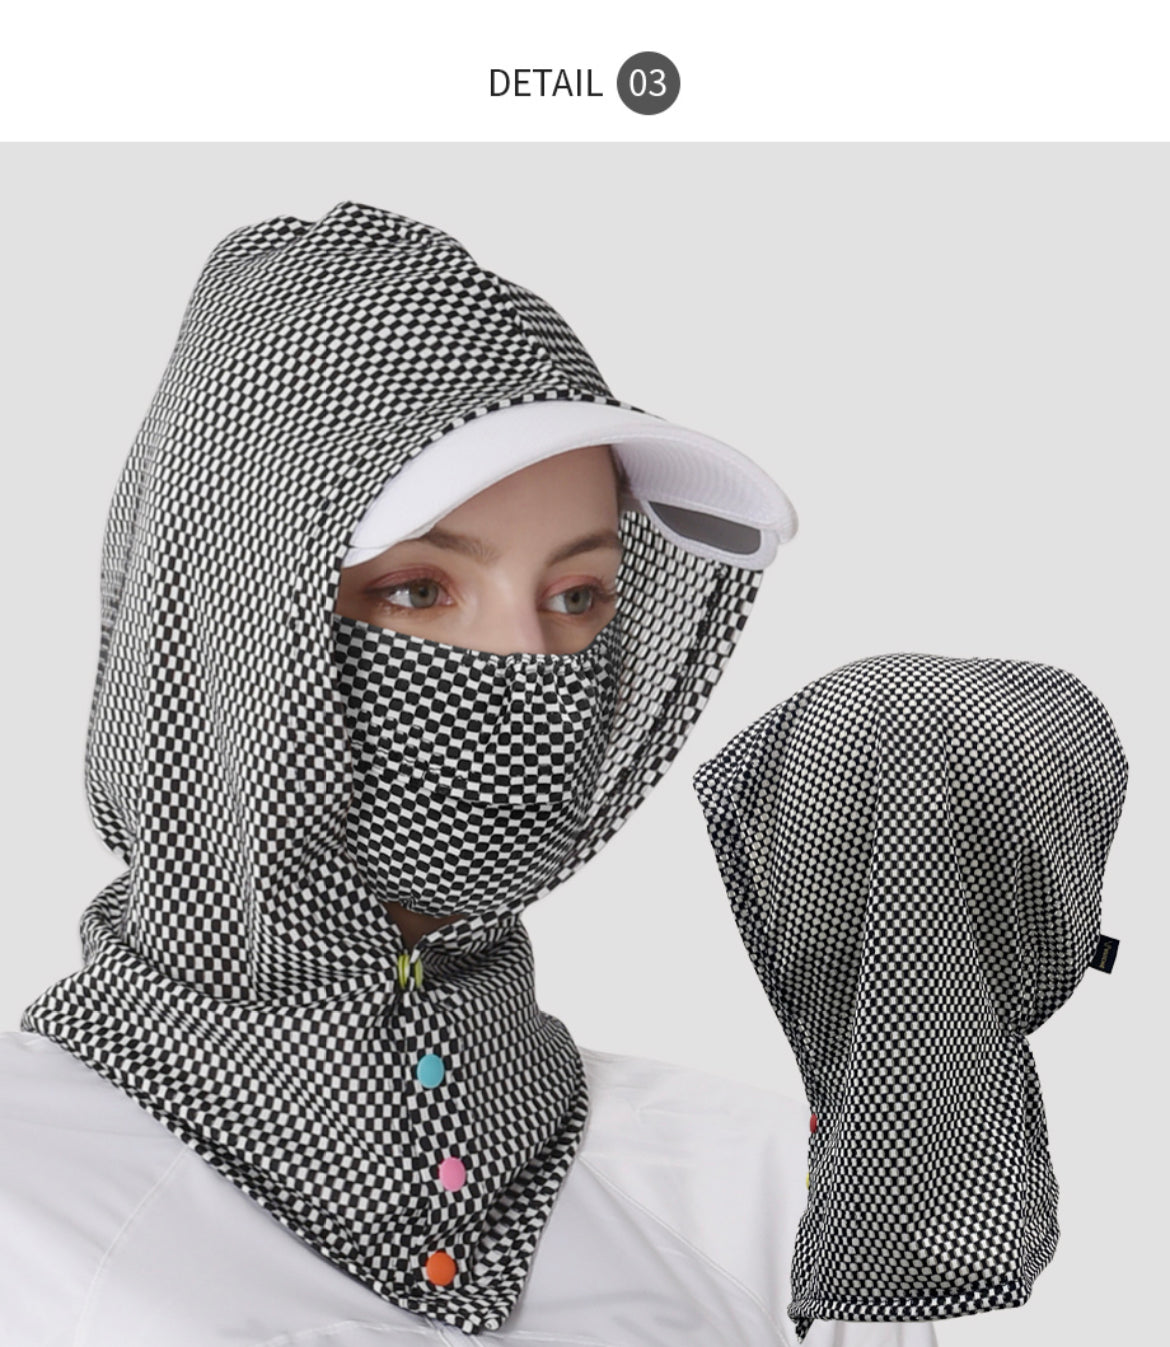 [Ariche] Ventilated Mesh Hood Neck Cover